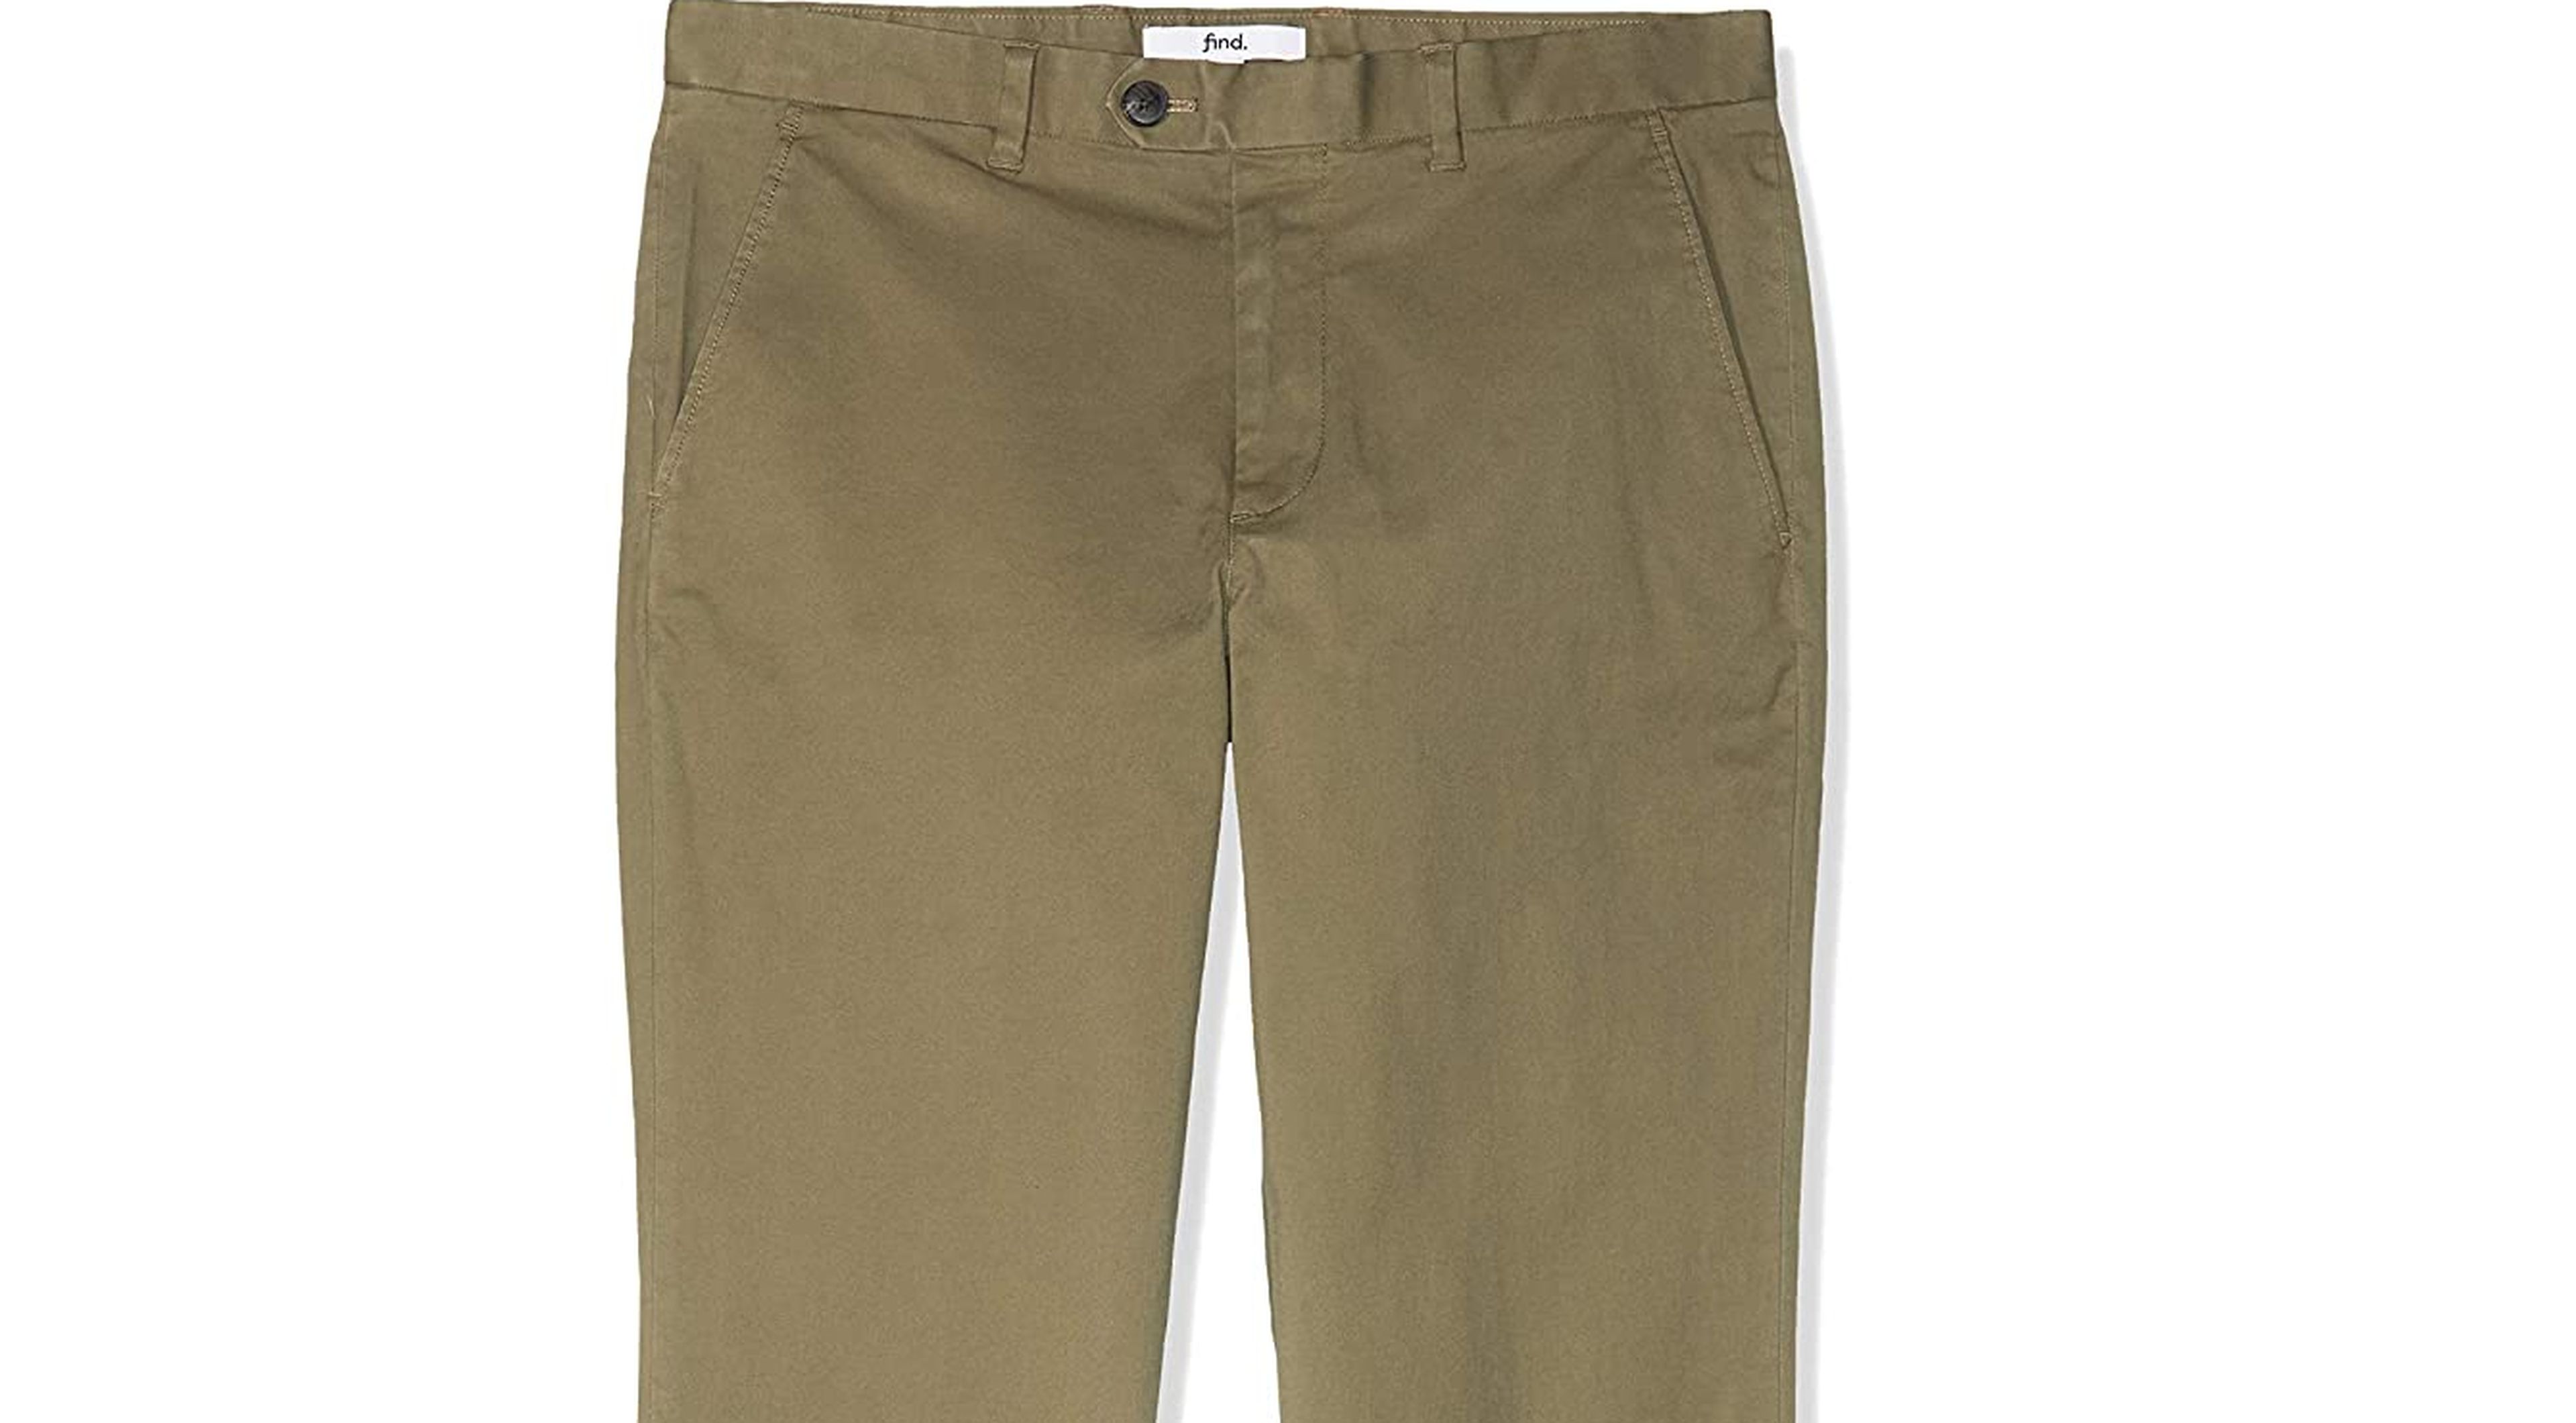 pantalones chinos Find by Amazon